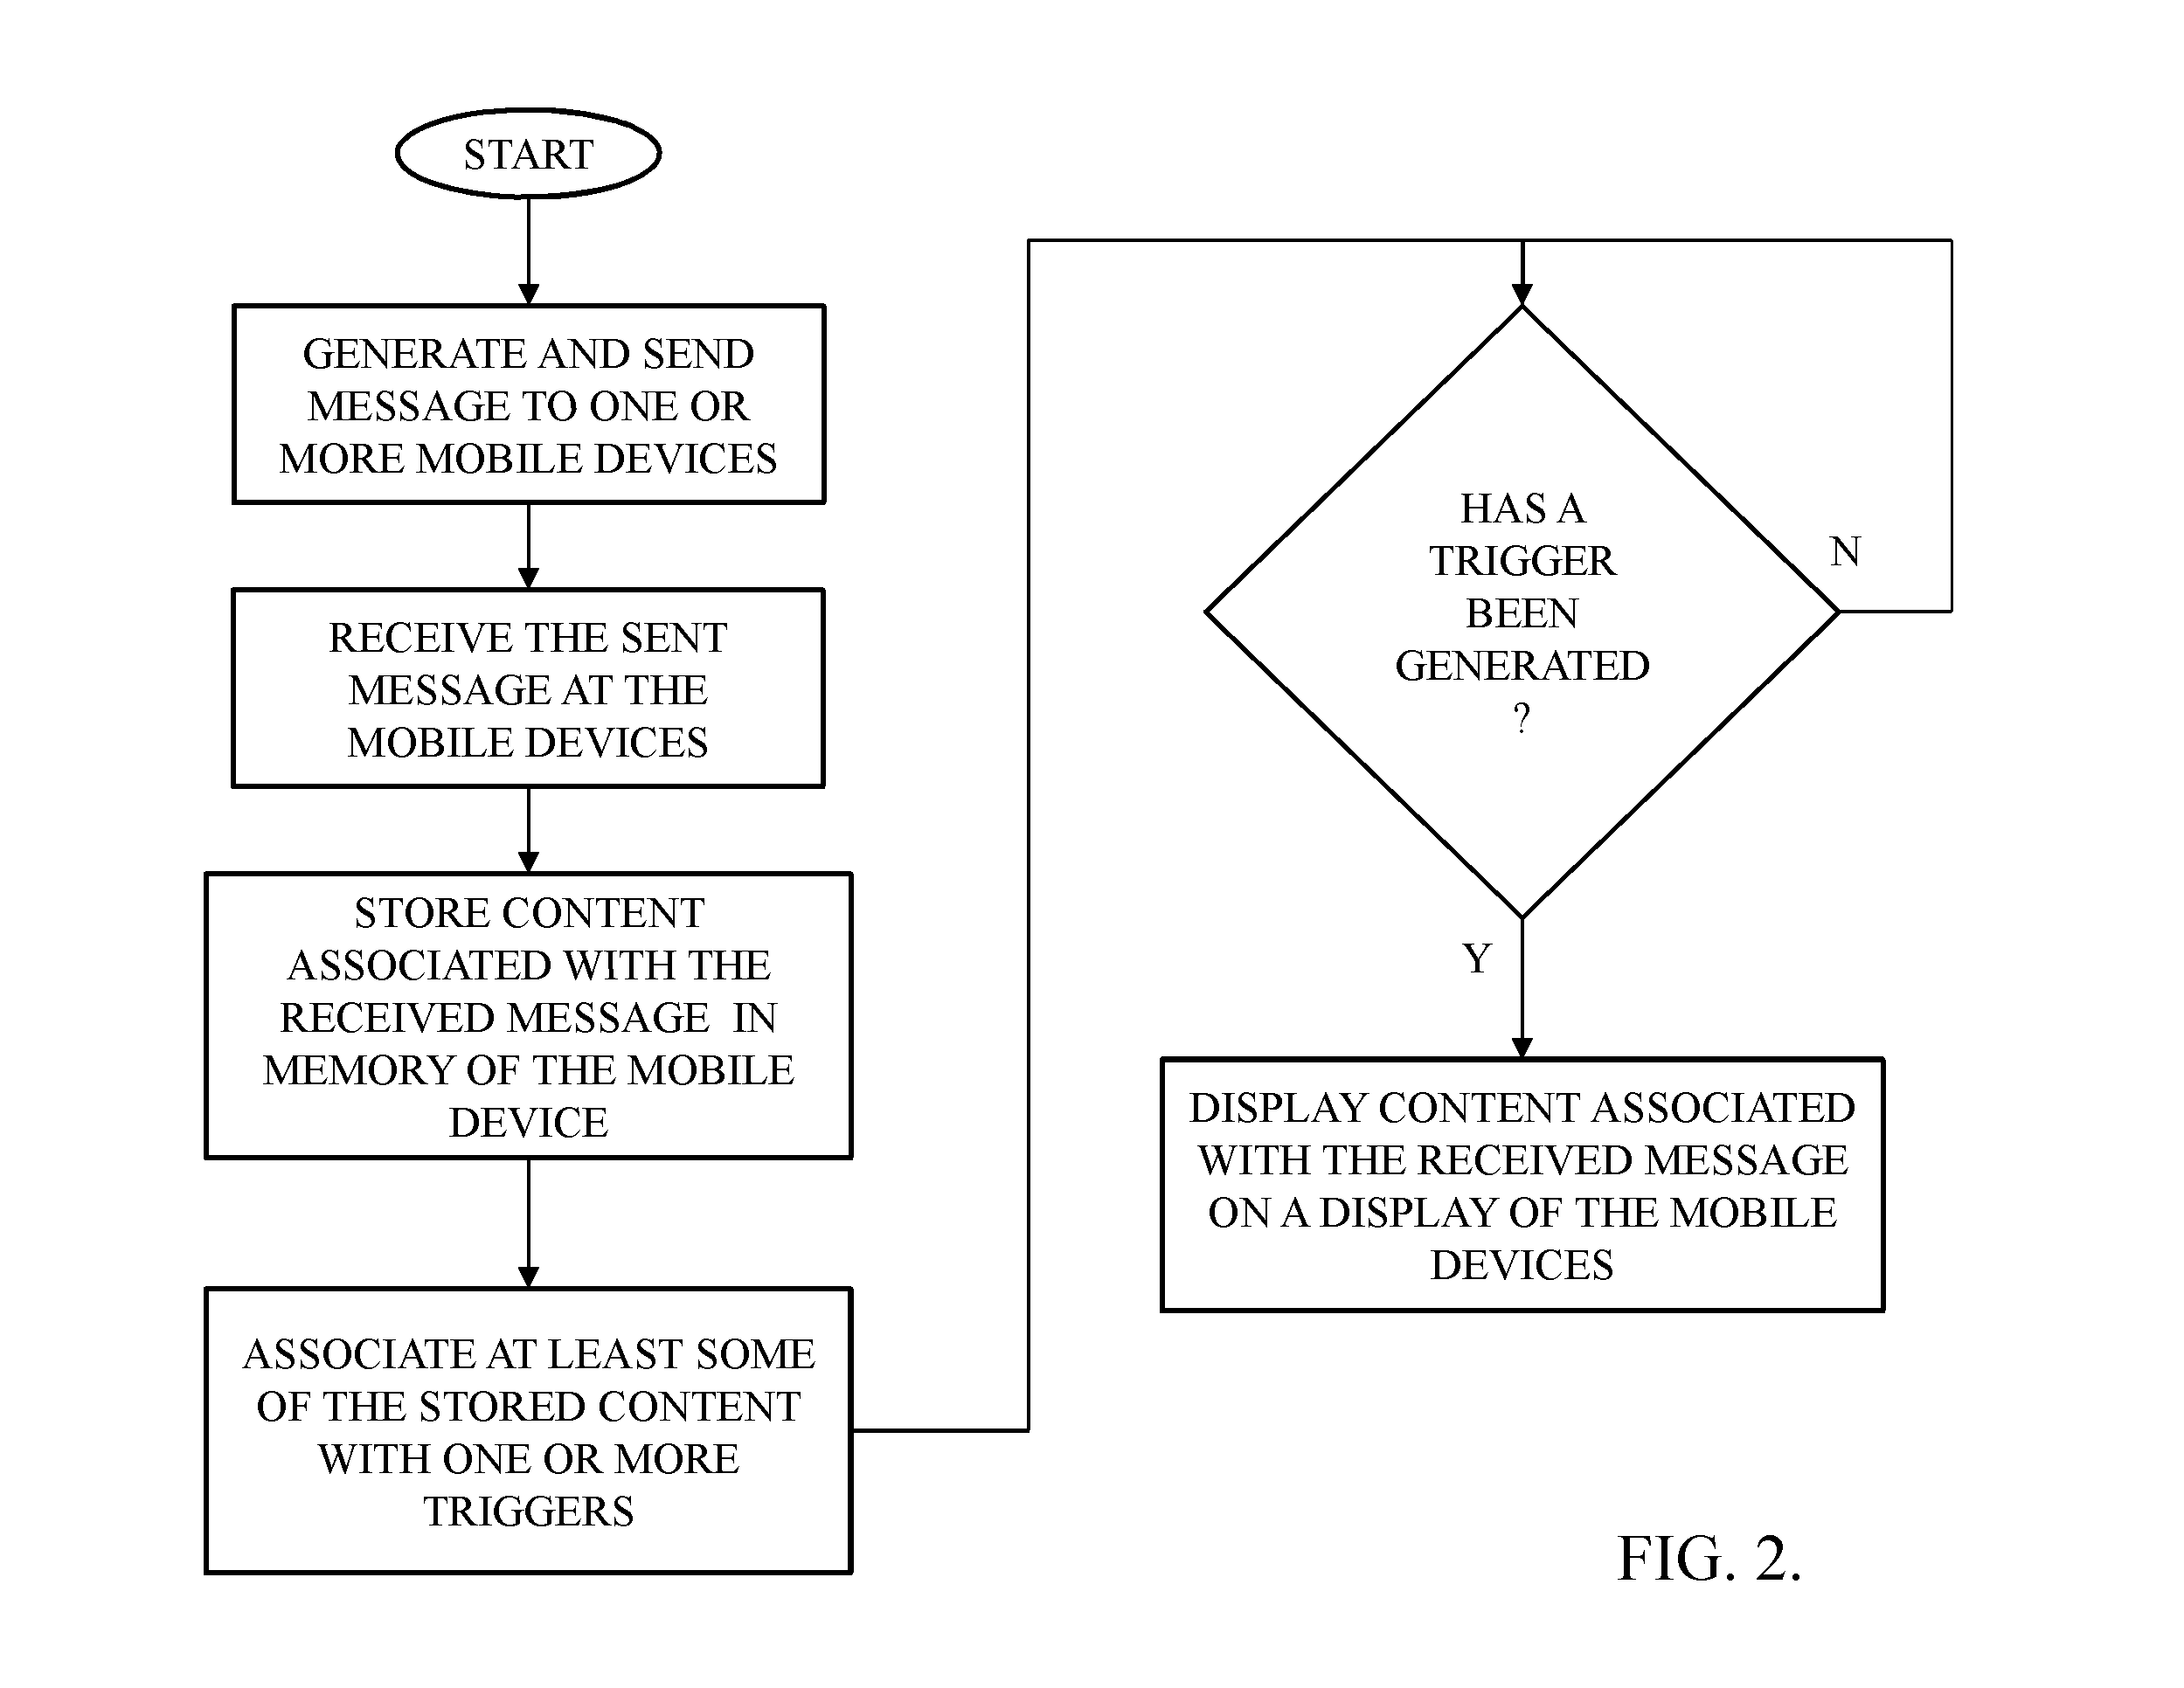 Systems and methods for improved content delivery to mobile communication devices